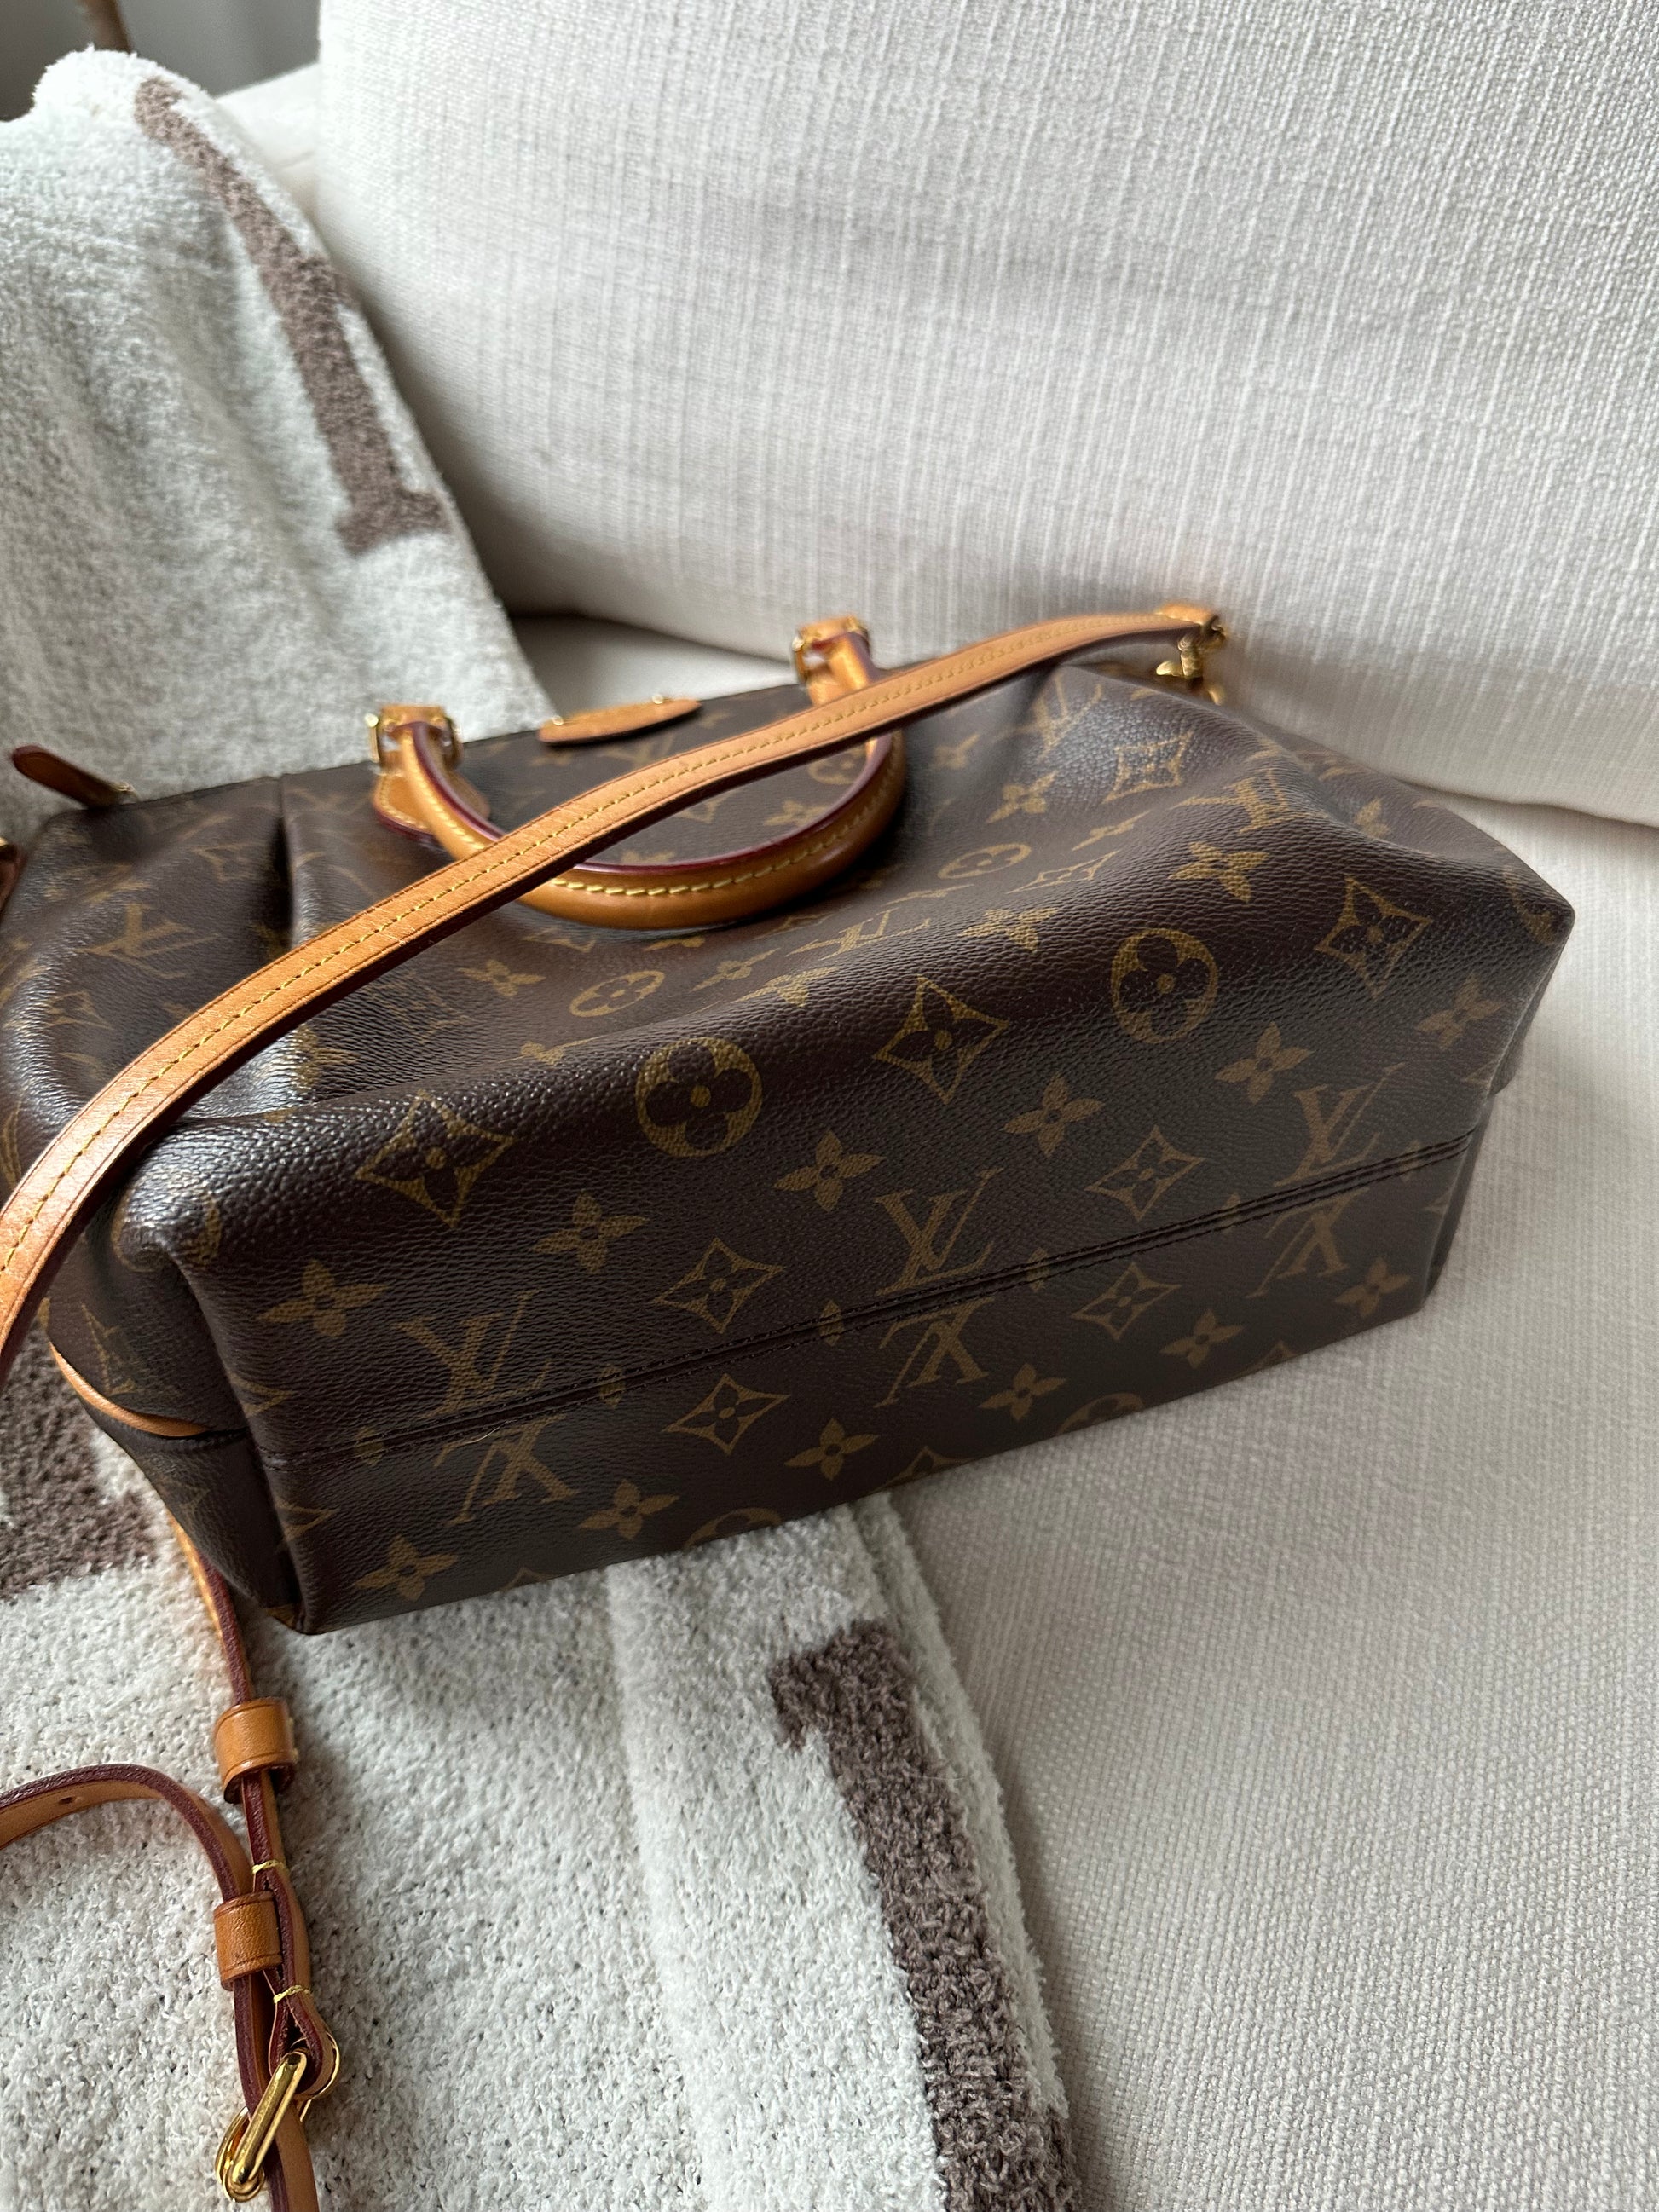 My Lvoe for LV - Louis Vuitton Turenne PM❤️ Available in